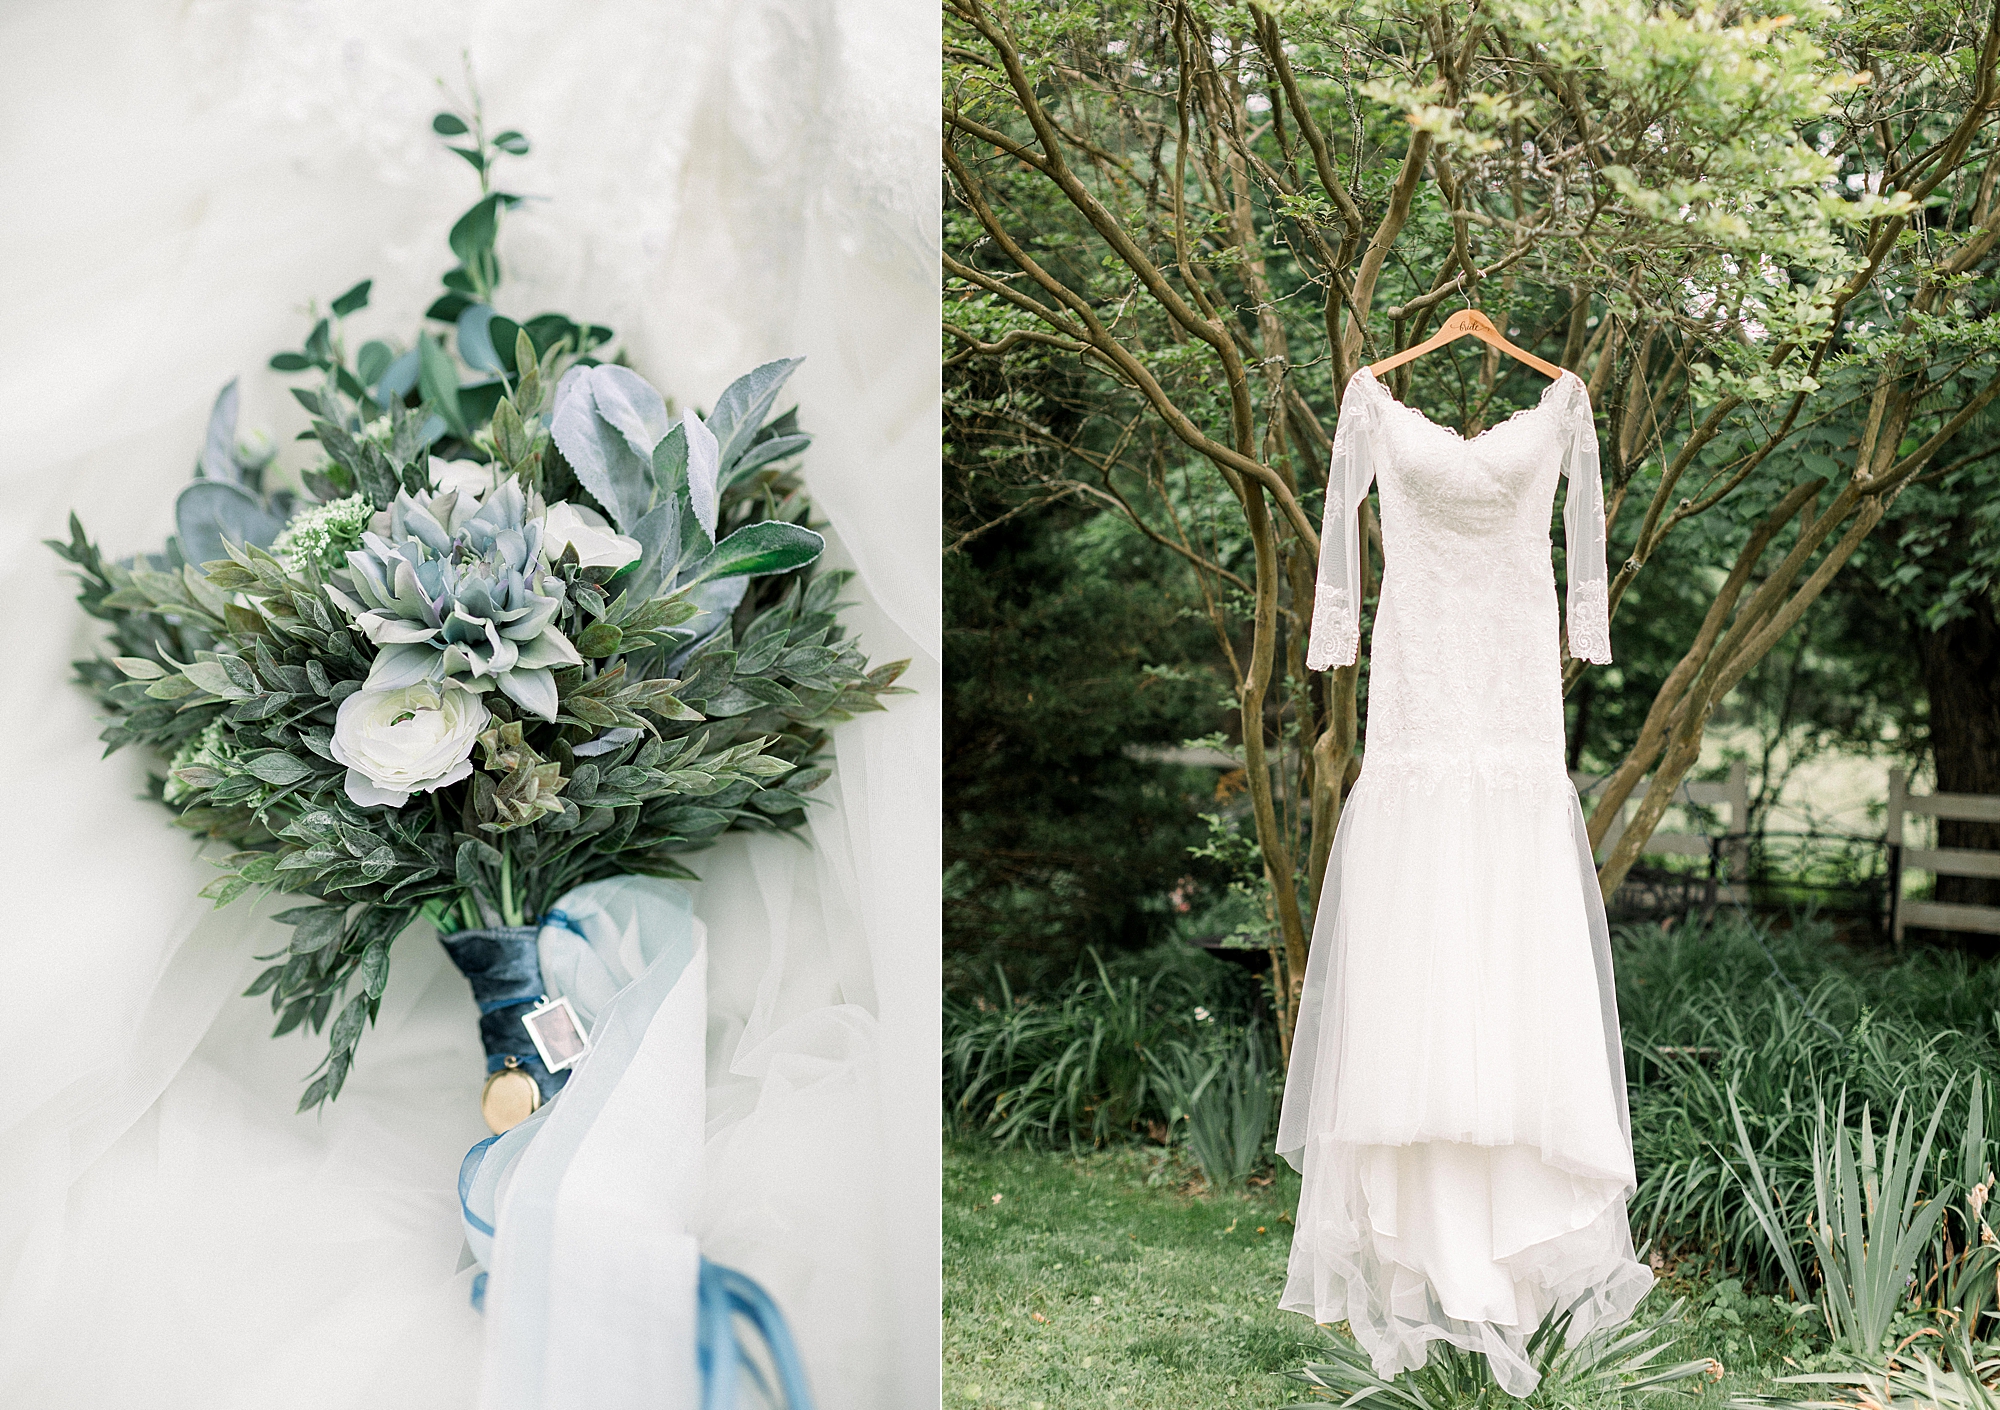 a bouquet of silk flowers with hints of blue next to a wedding dress on a hanger